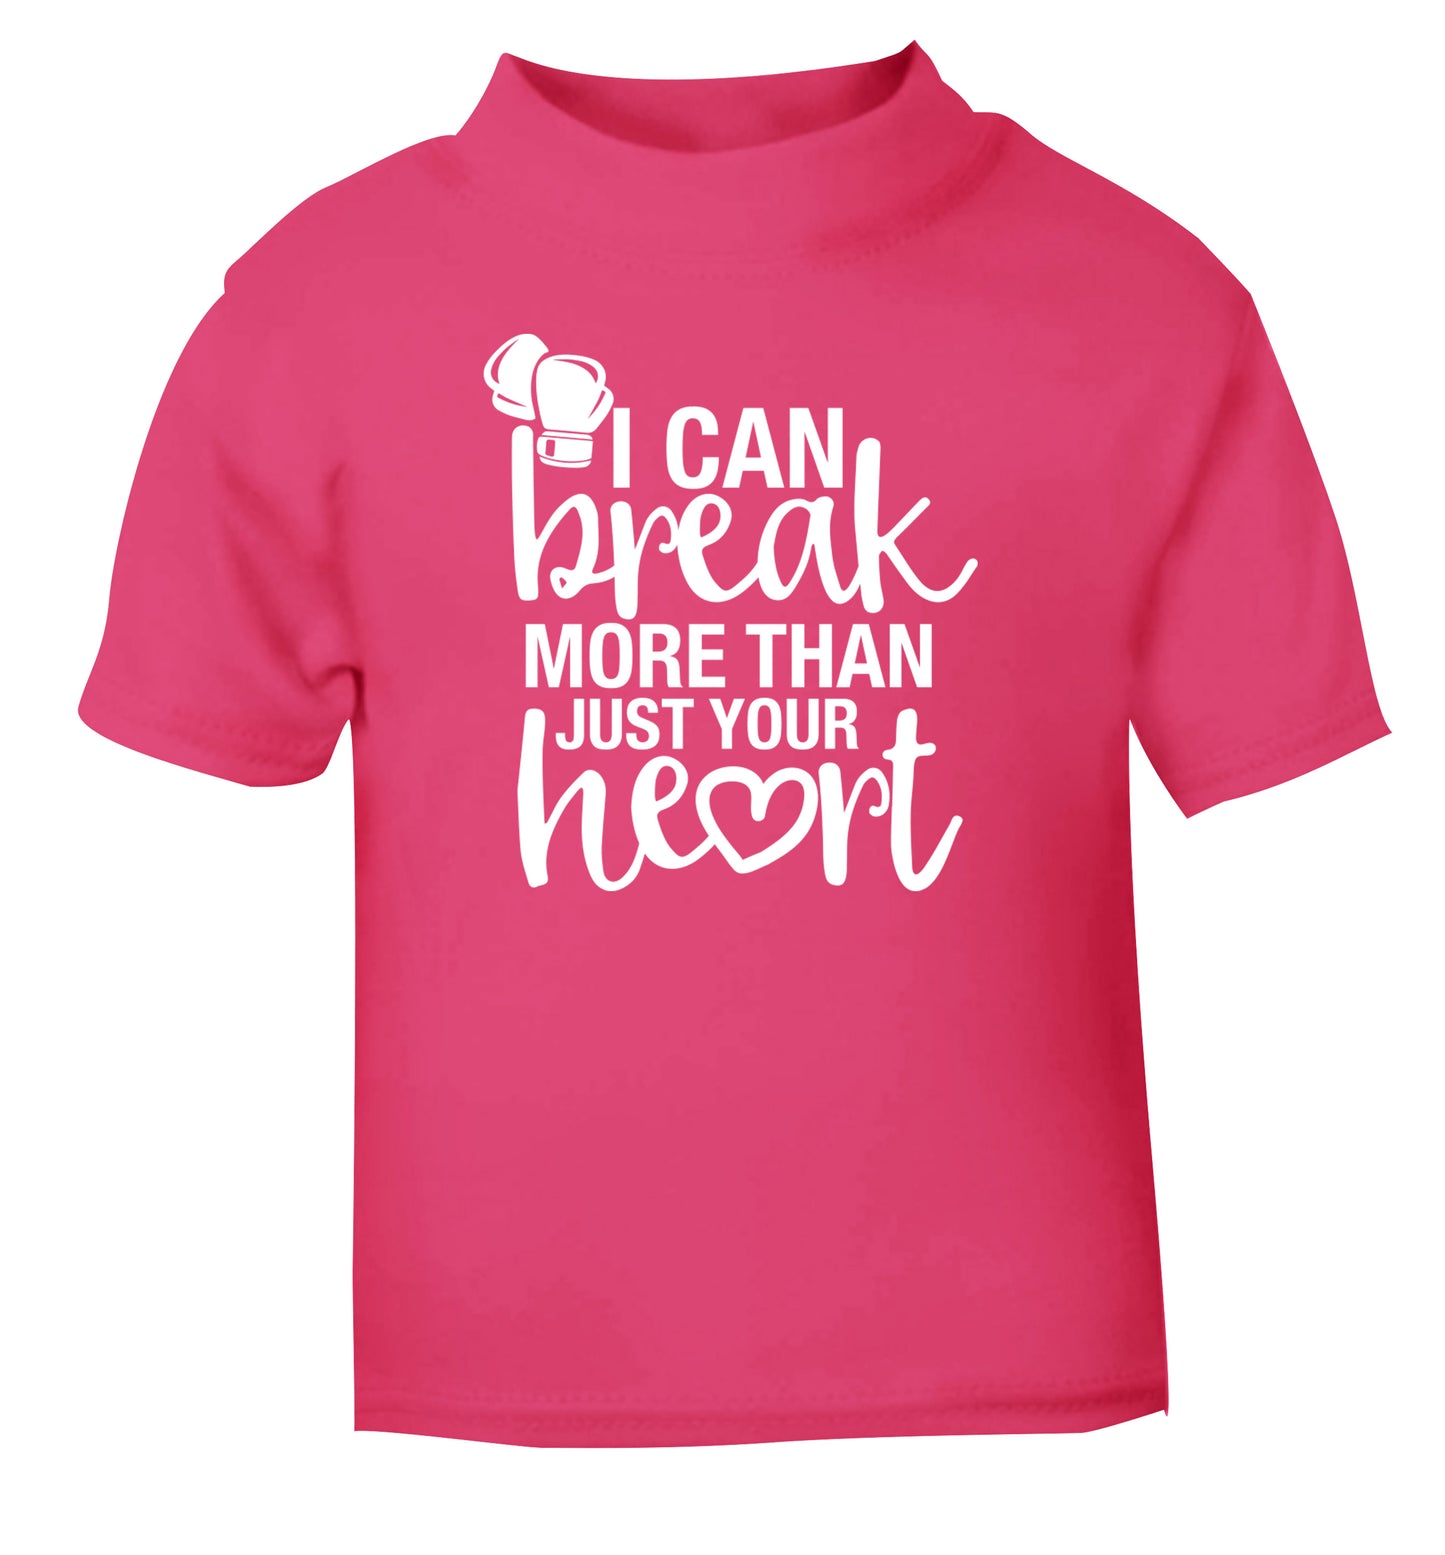 I can break more than just your heart pink Baby Toddler Tshirt 2 Years